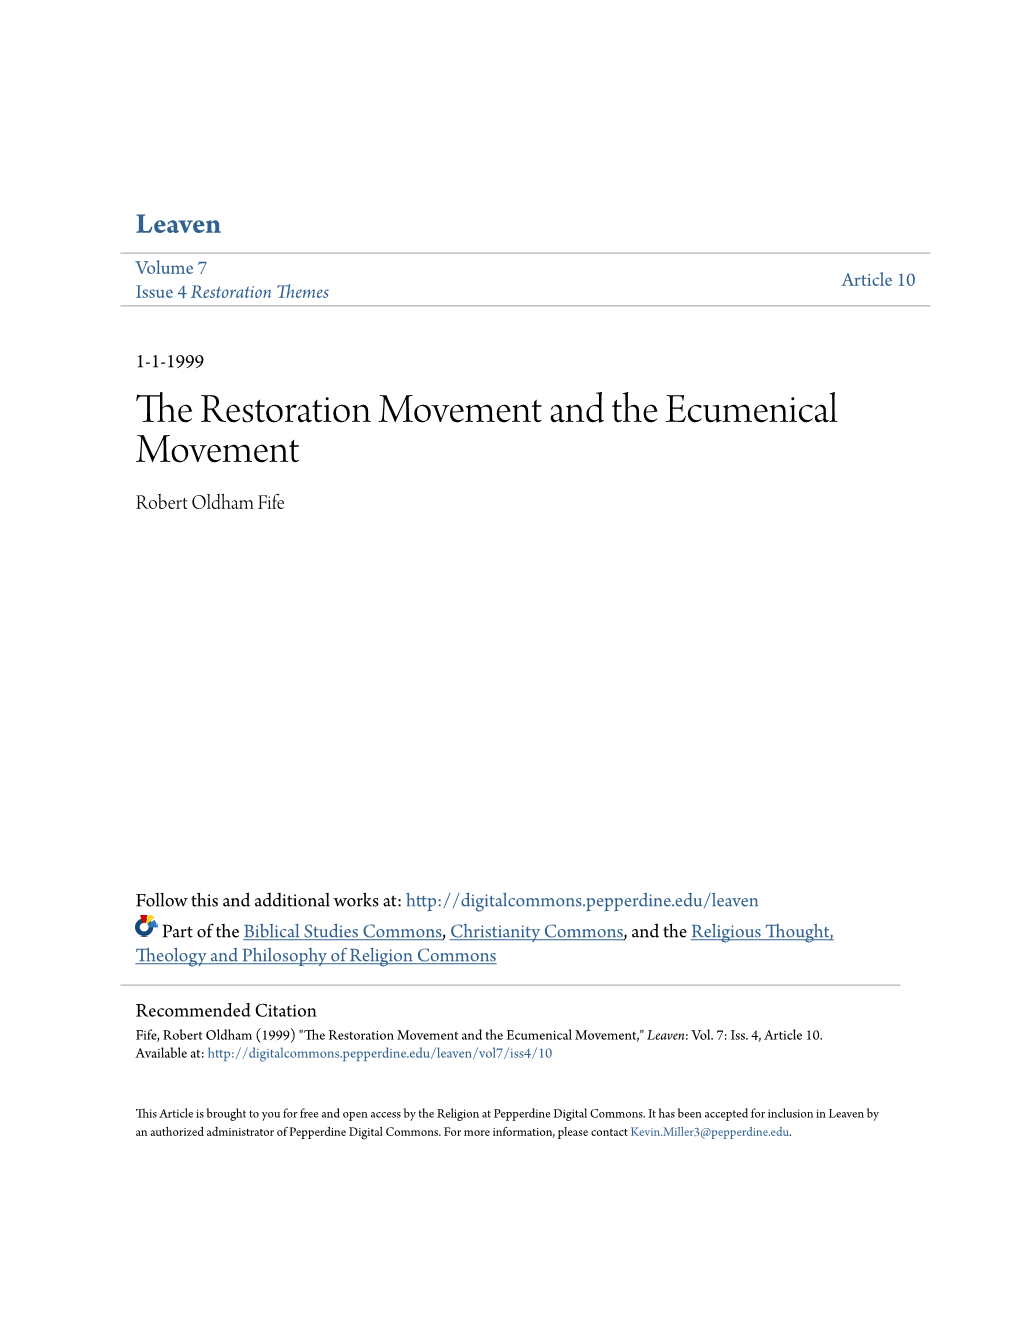 The Restoration Movement and the Ecumenical Movement Robert Oldham Fife